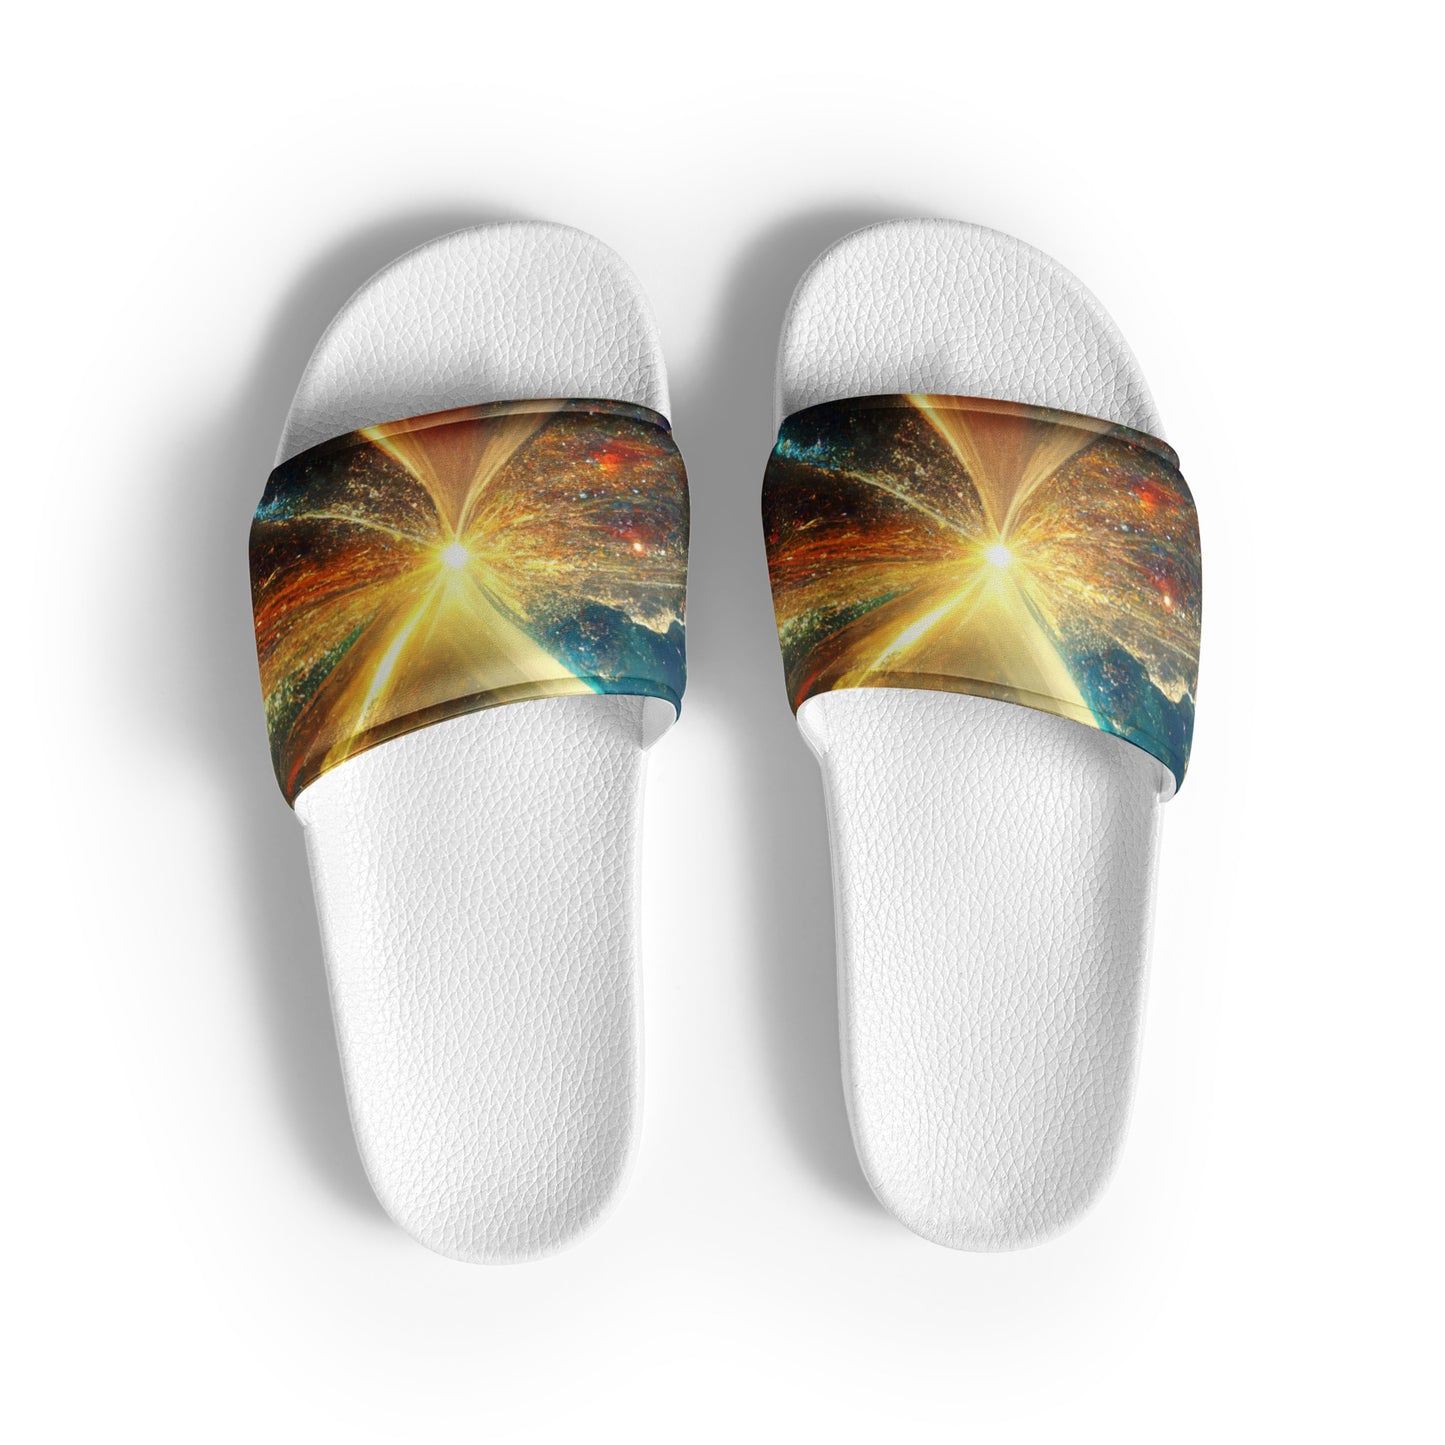 Men's Slides: Cushioned Faux Leather Straps, Lightweight PU Outsole, and Textured Footbed